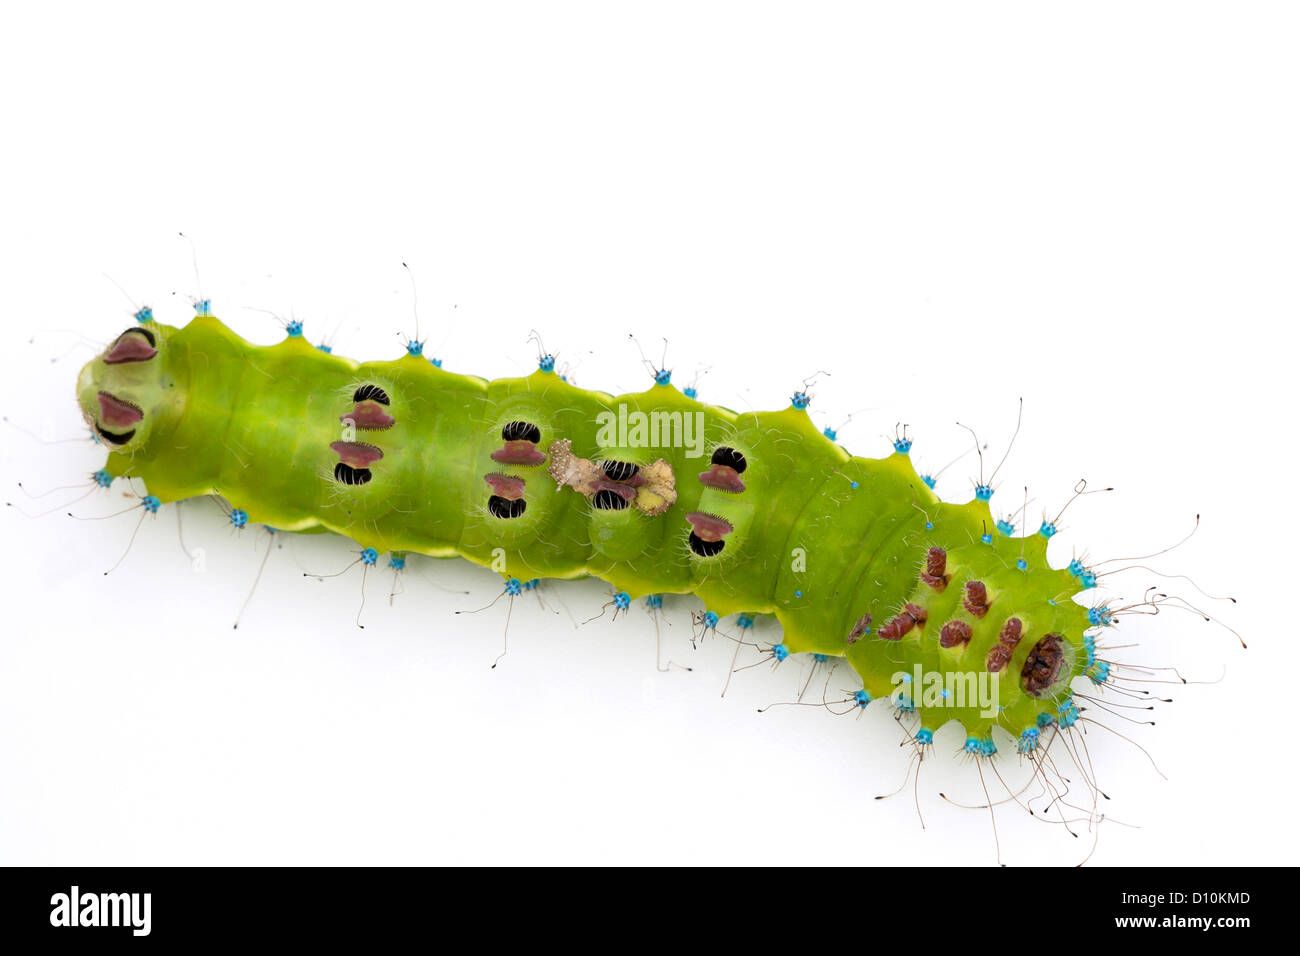 Caterpillar of a giant silk moth upside down on white background Stock Photo